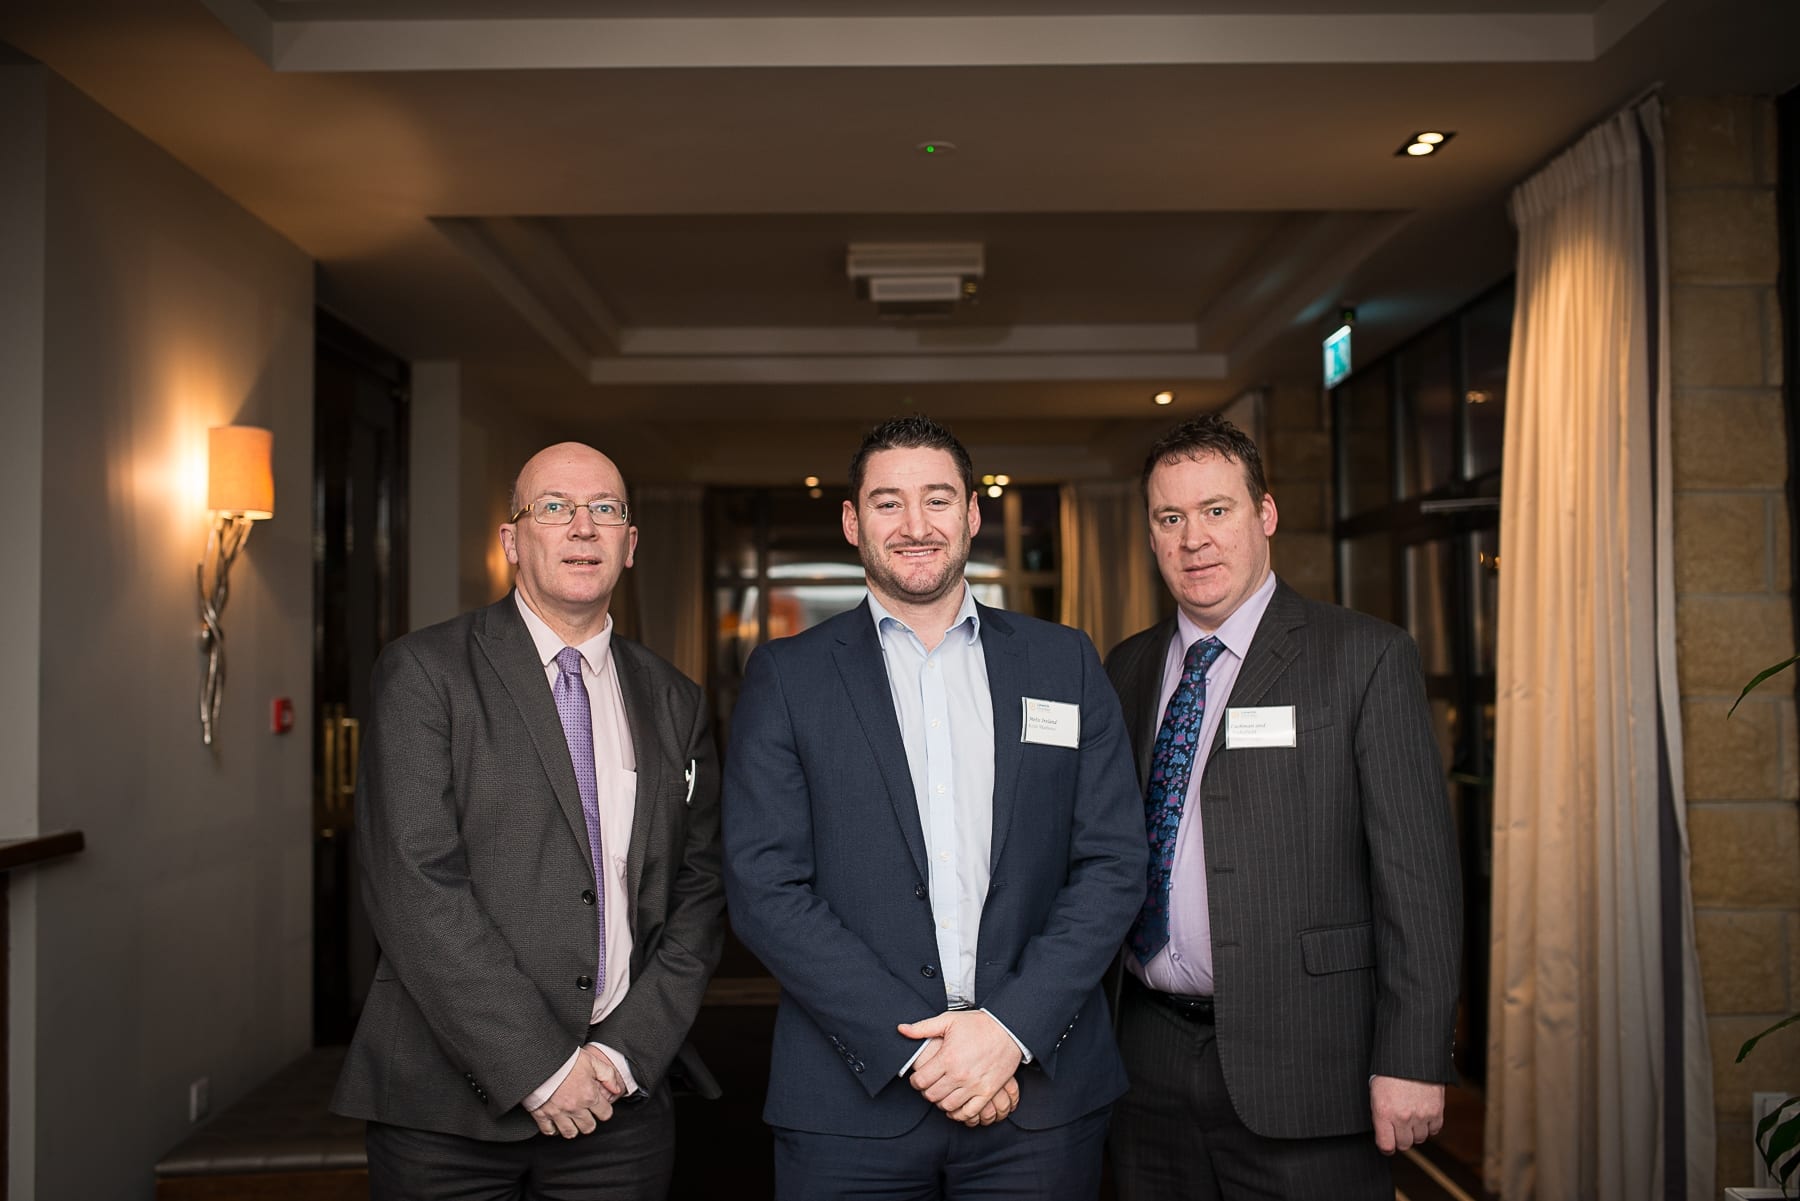 Economic Breakfast Briefing; European and Local Economic Outlook In association with the Limerick Post which took place in the Castletroy Park Hotel on Monday 11th Feb 2019:  From left to right:Alec Morrissey - Limerick Post, Keith Mathews - Metis Ireland, Dermot Hughes - Cushman Wakefield. 
Image by Morning Star Photography